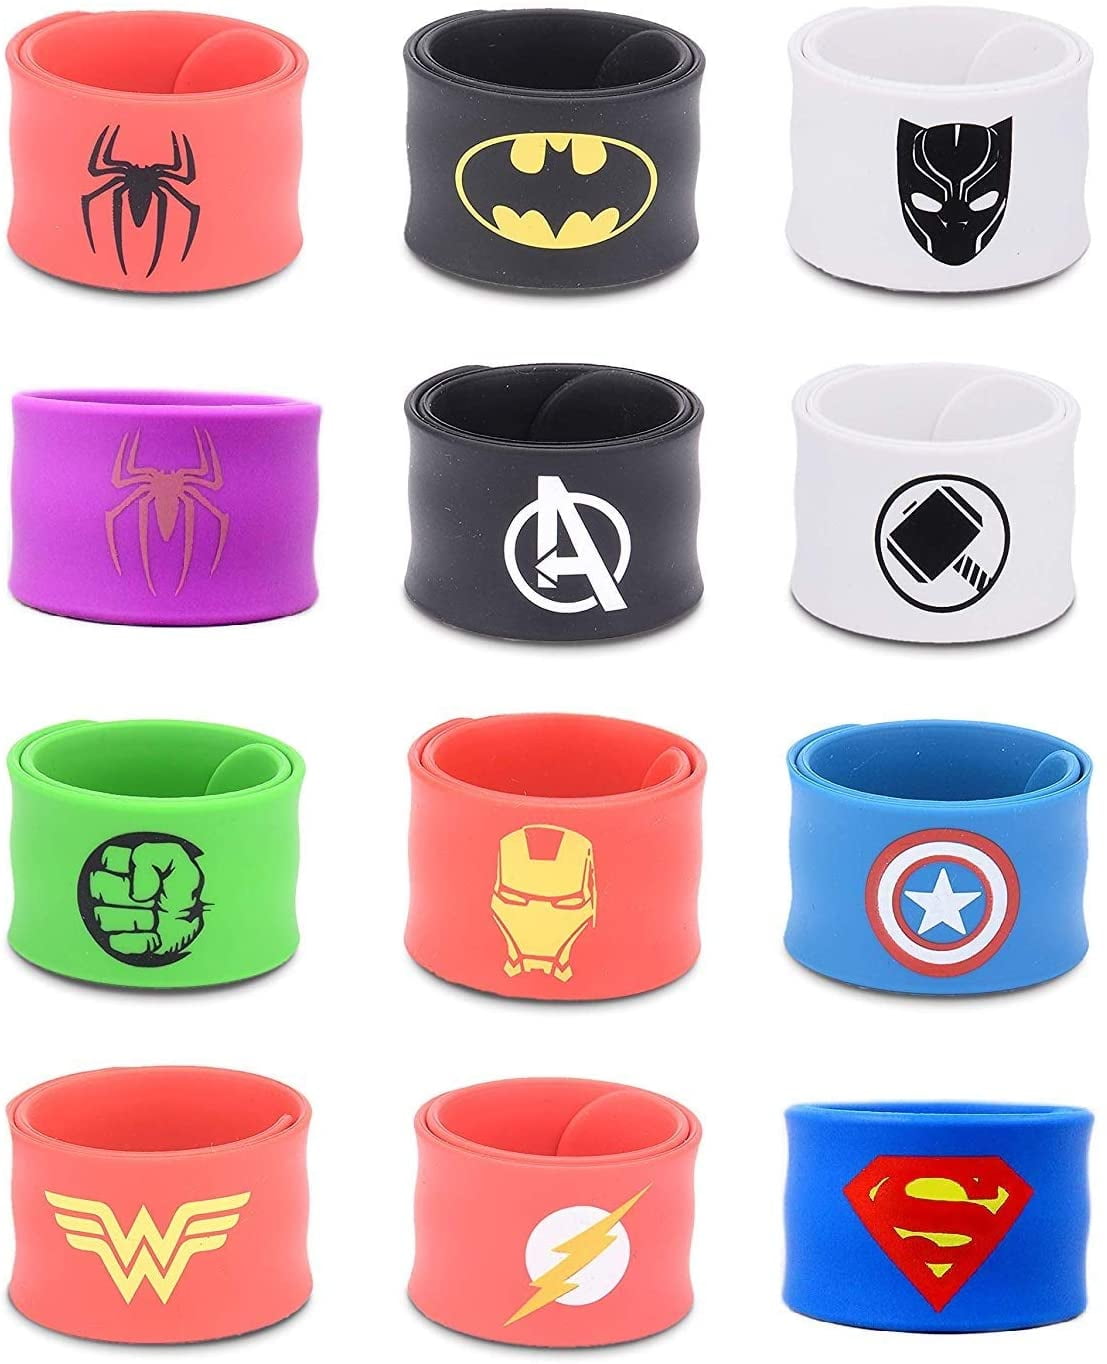 Party Favors for Kids 10 Pack Wristband Accessories Boys Birthday Party Supplies Superhero Bracelet Kids Party Supplies 10 Superhero Slap Bracelets